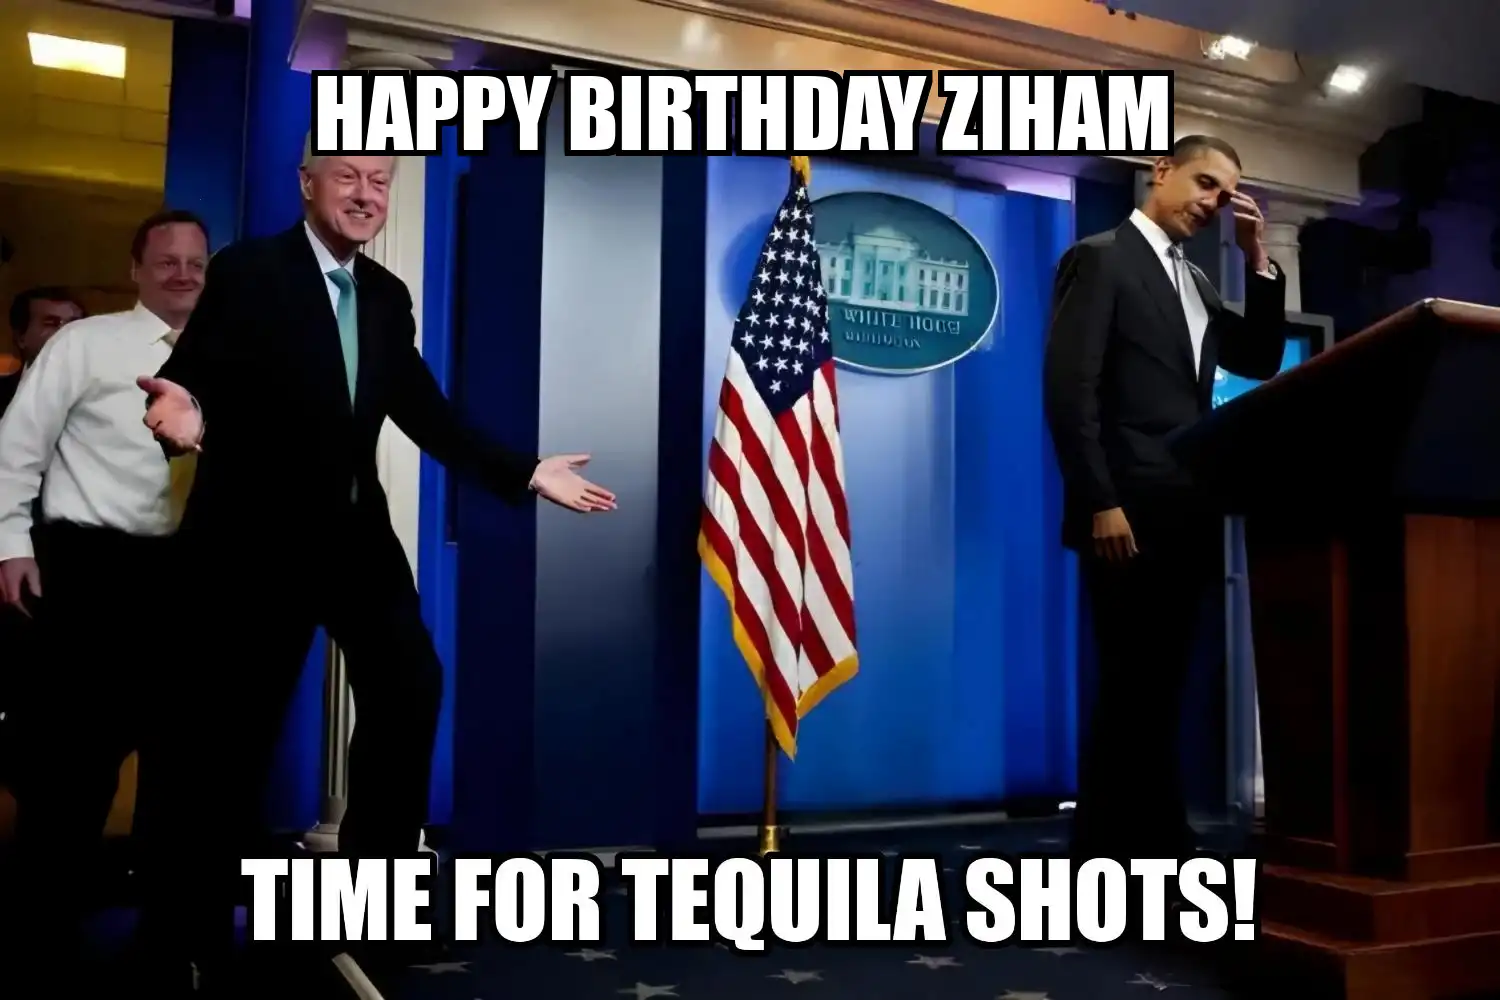 Happy Birthday Ziham Time For Tequila Shots Memes